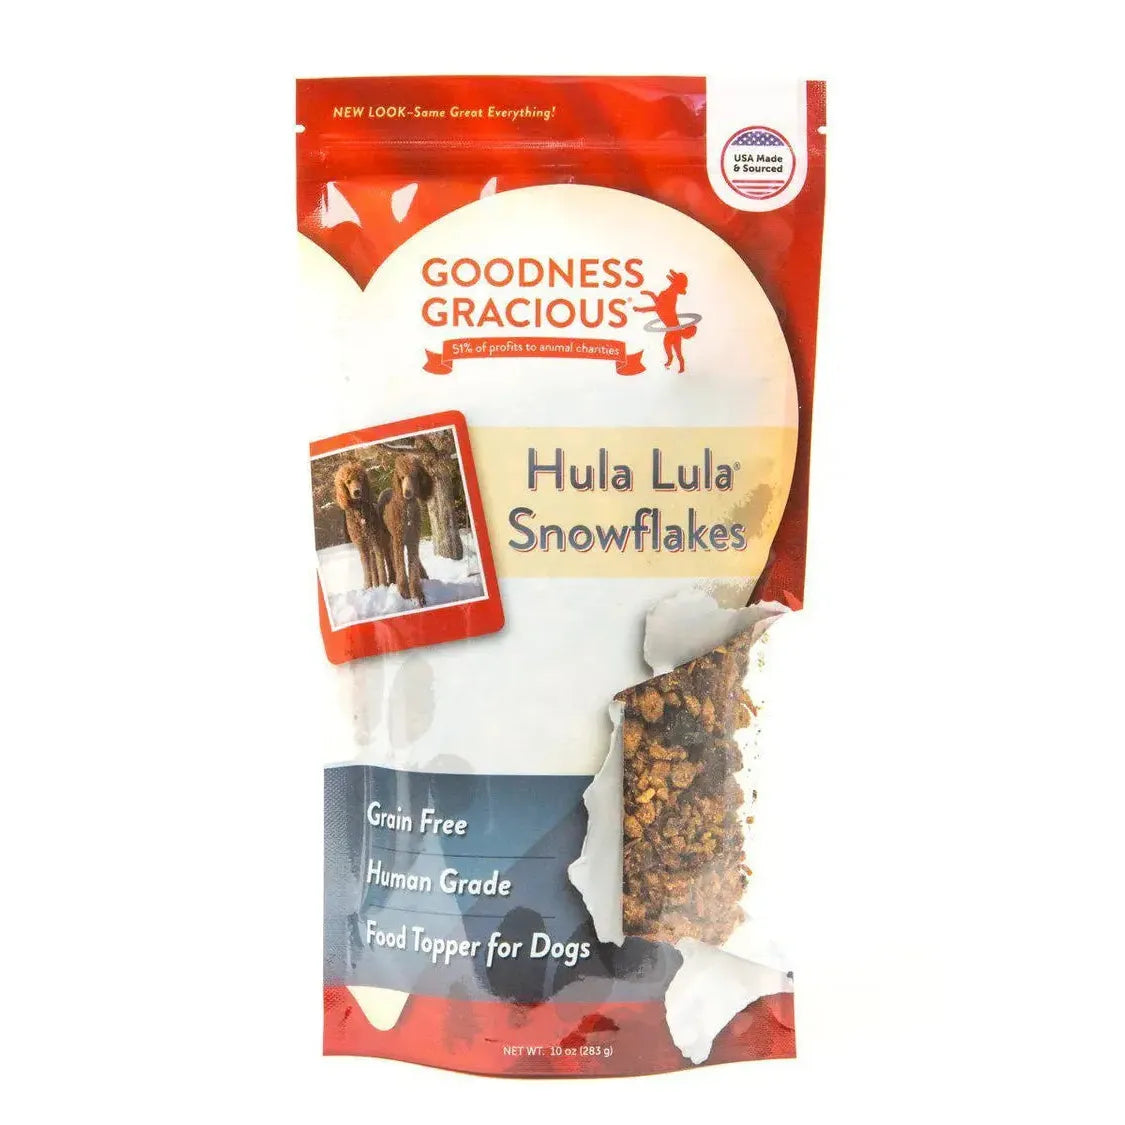 Goodness Gracious Hula Lula Snowflakes Food Topper For Dogs Goodness Gracious